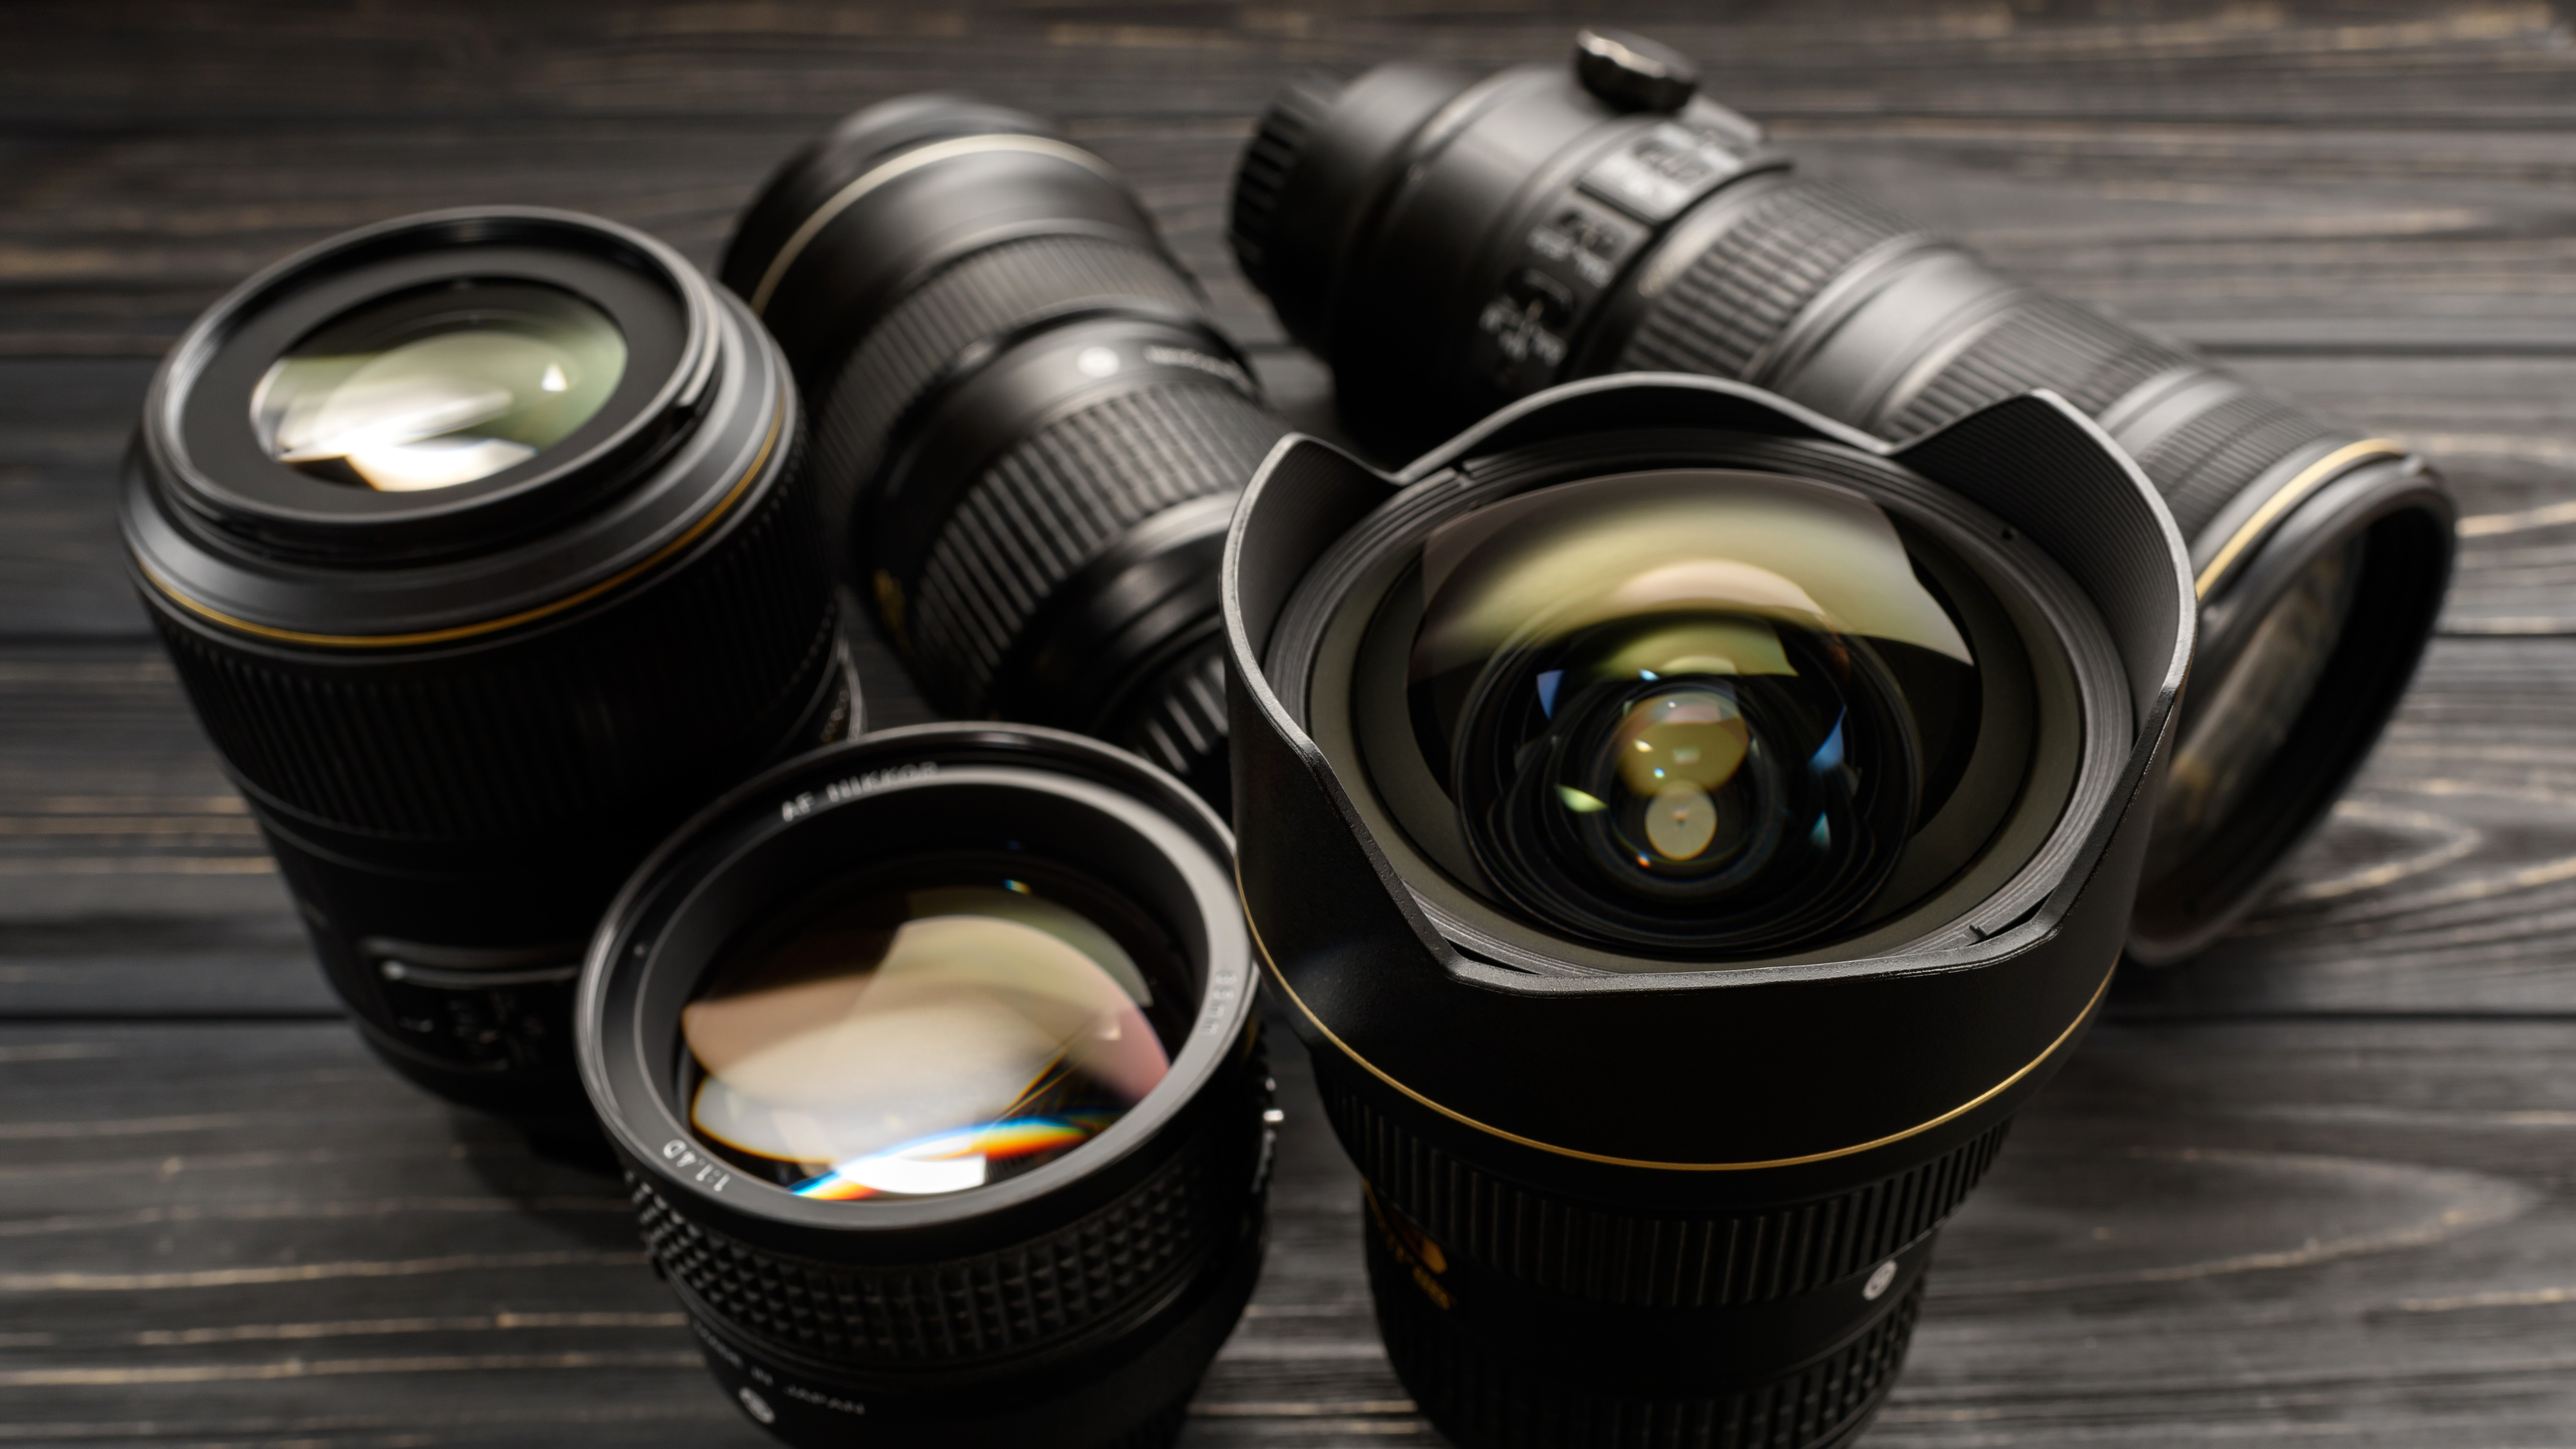 More discontinued Nikon lenses signal the end for its beginner DSLRs